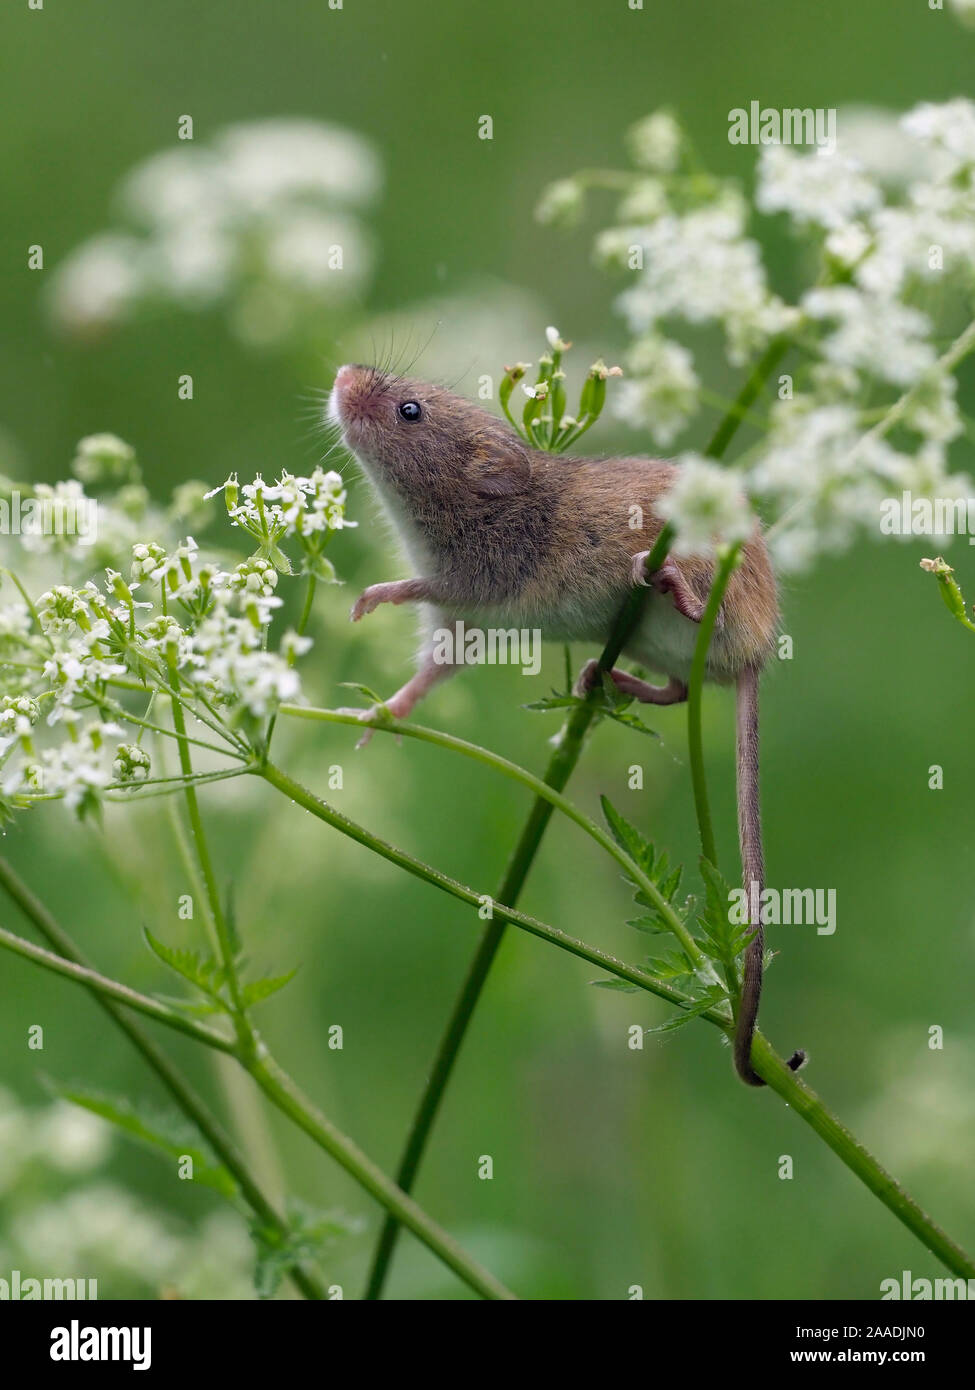 Harvest mouse (Micromys minutus) climbing among Cow Parsley, Hertfordshire, England, UK, May, Controlled conditions Stock Photo